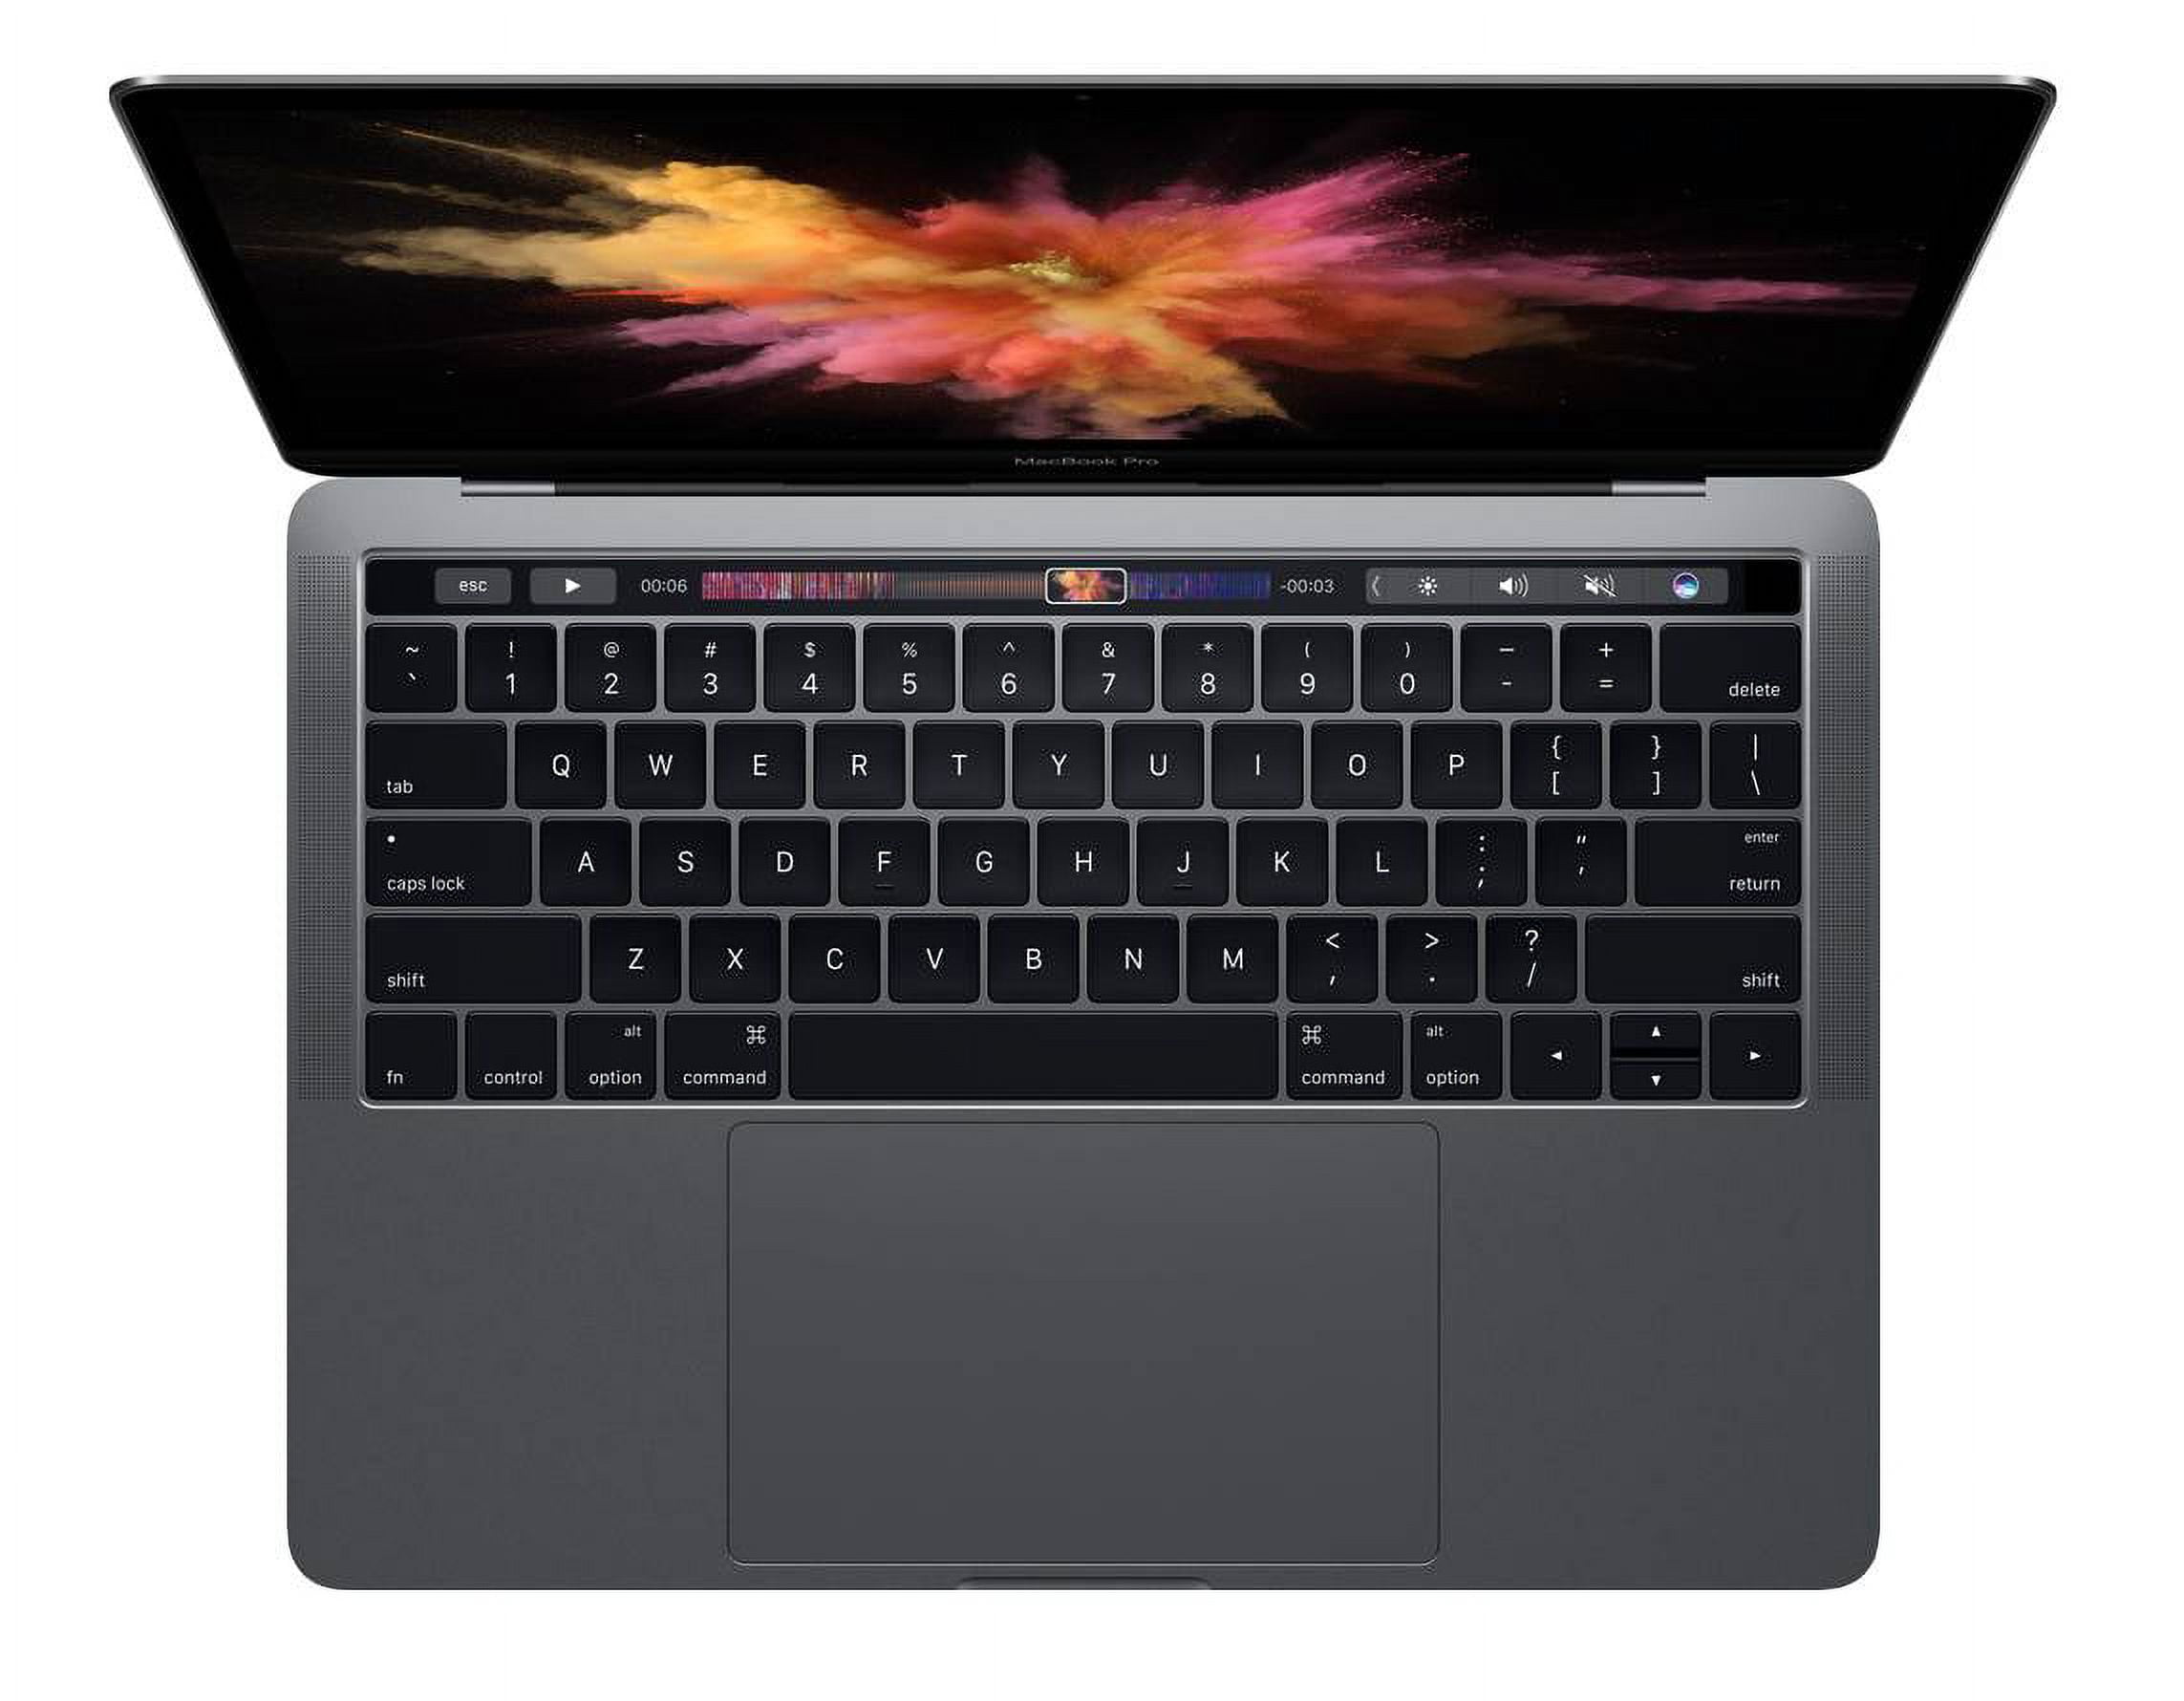 Apple A Grade Macbook Pro 13.3-inch (Retina, Space Gray, Touch